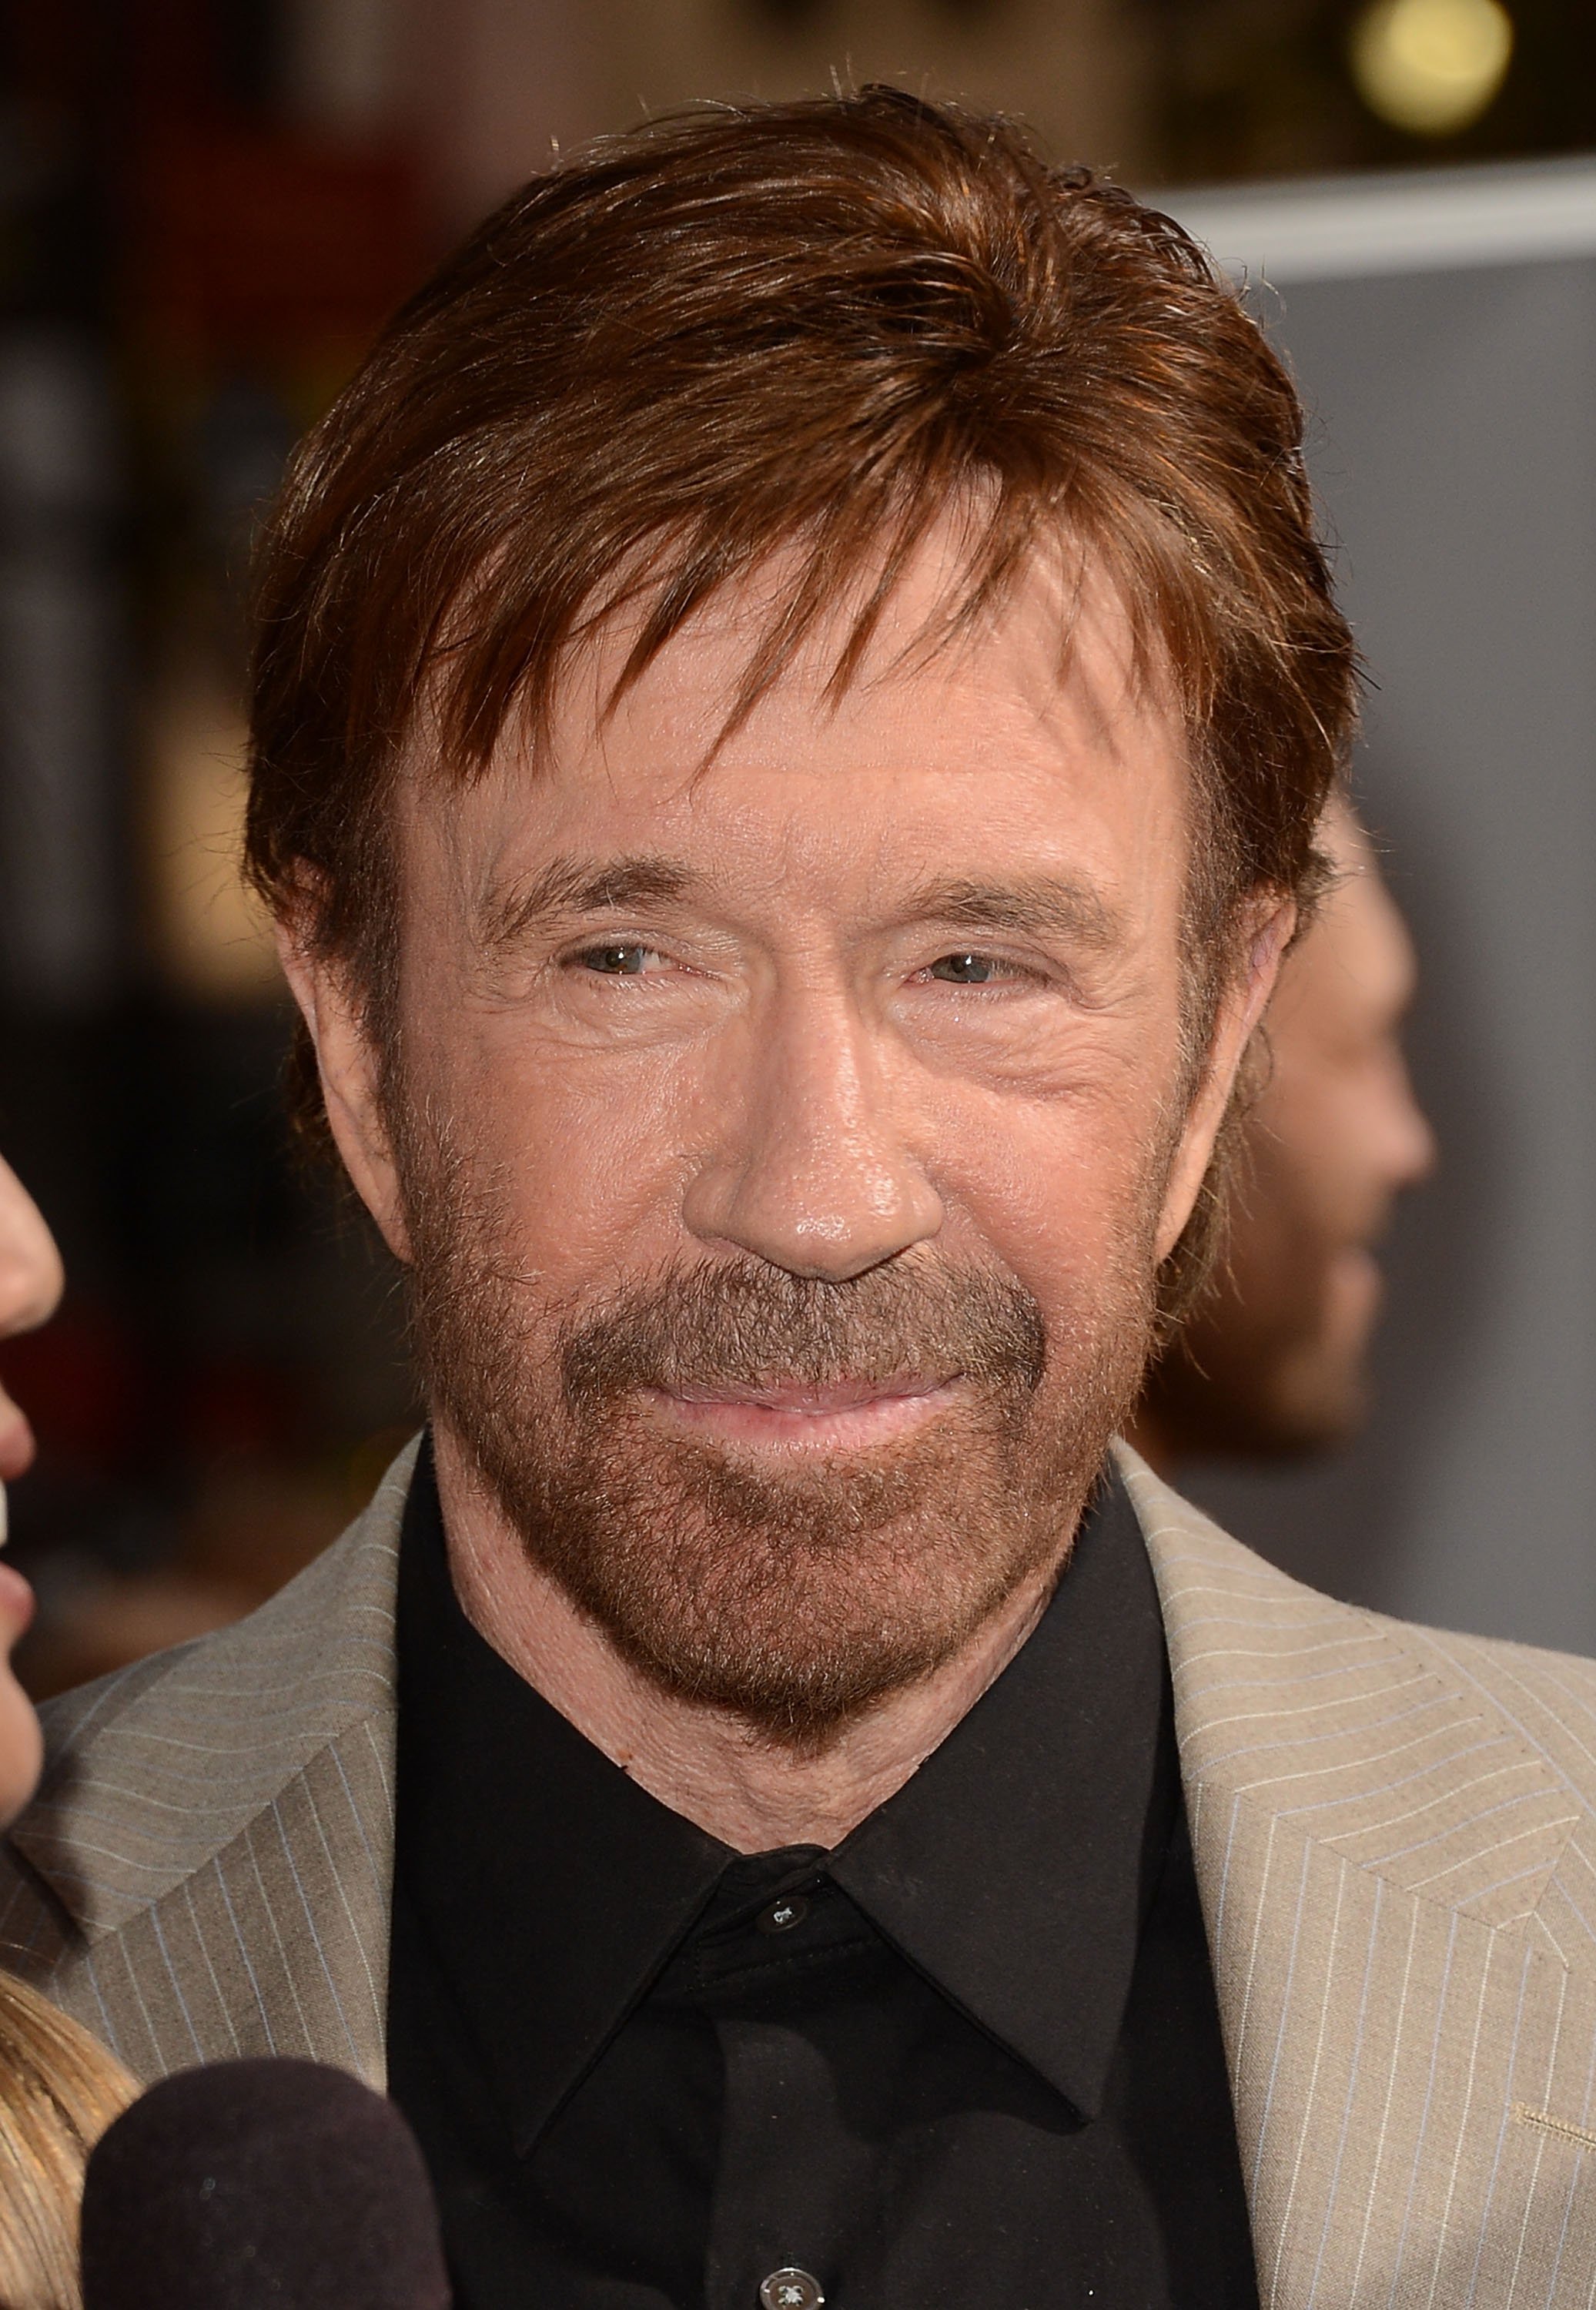 Chuck Norris at Lionsgate Films' 'The Expendables 2' premiere in Hollywood, California | Photo: Jason Merritt/Getty Images